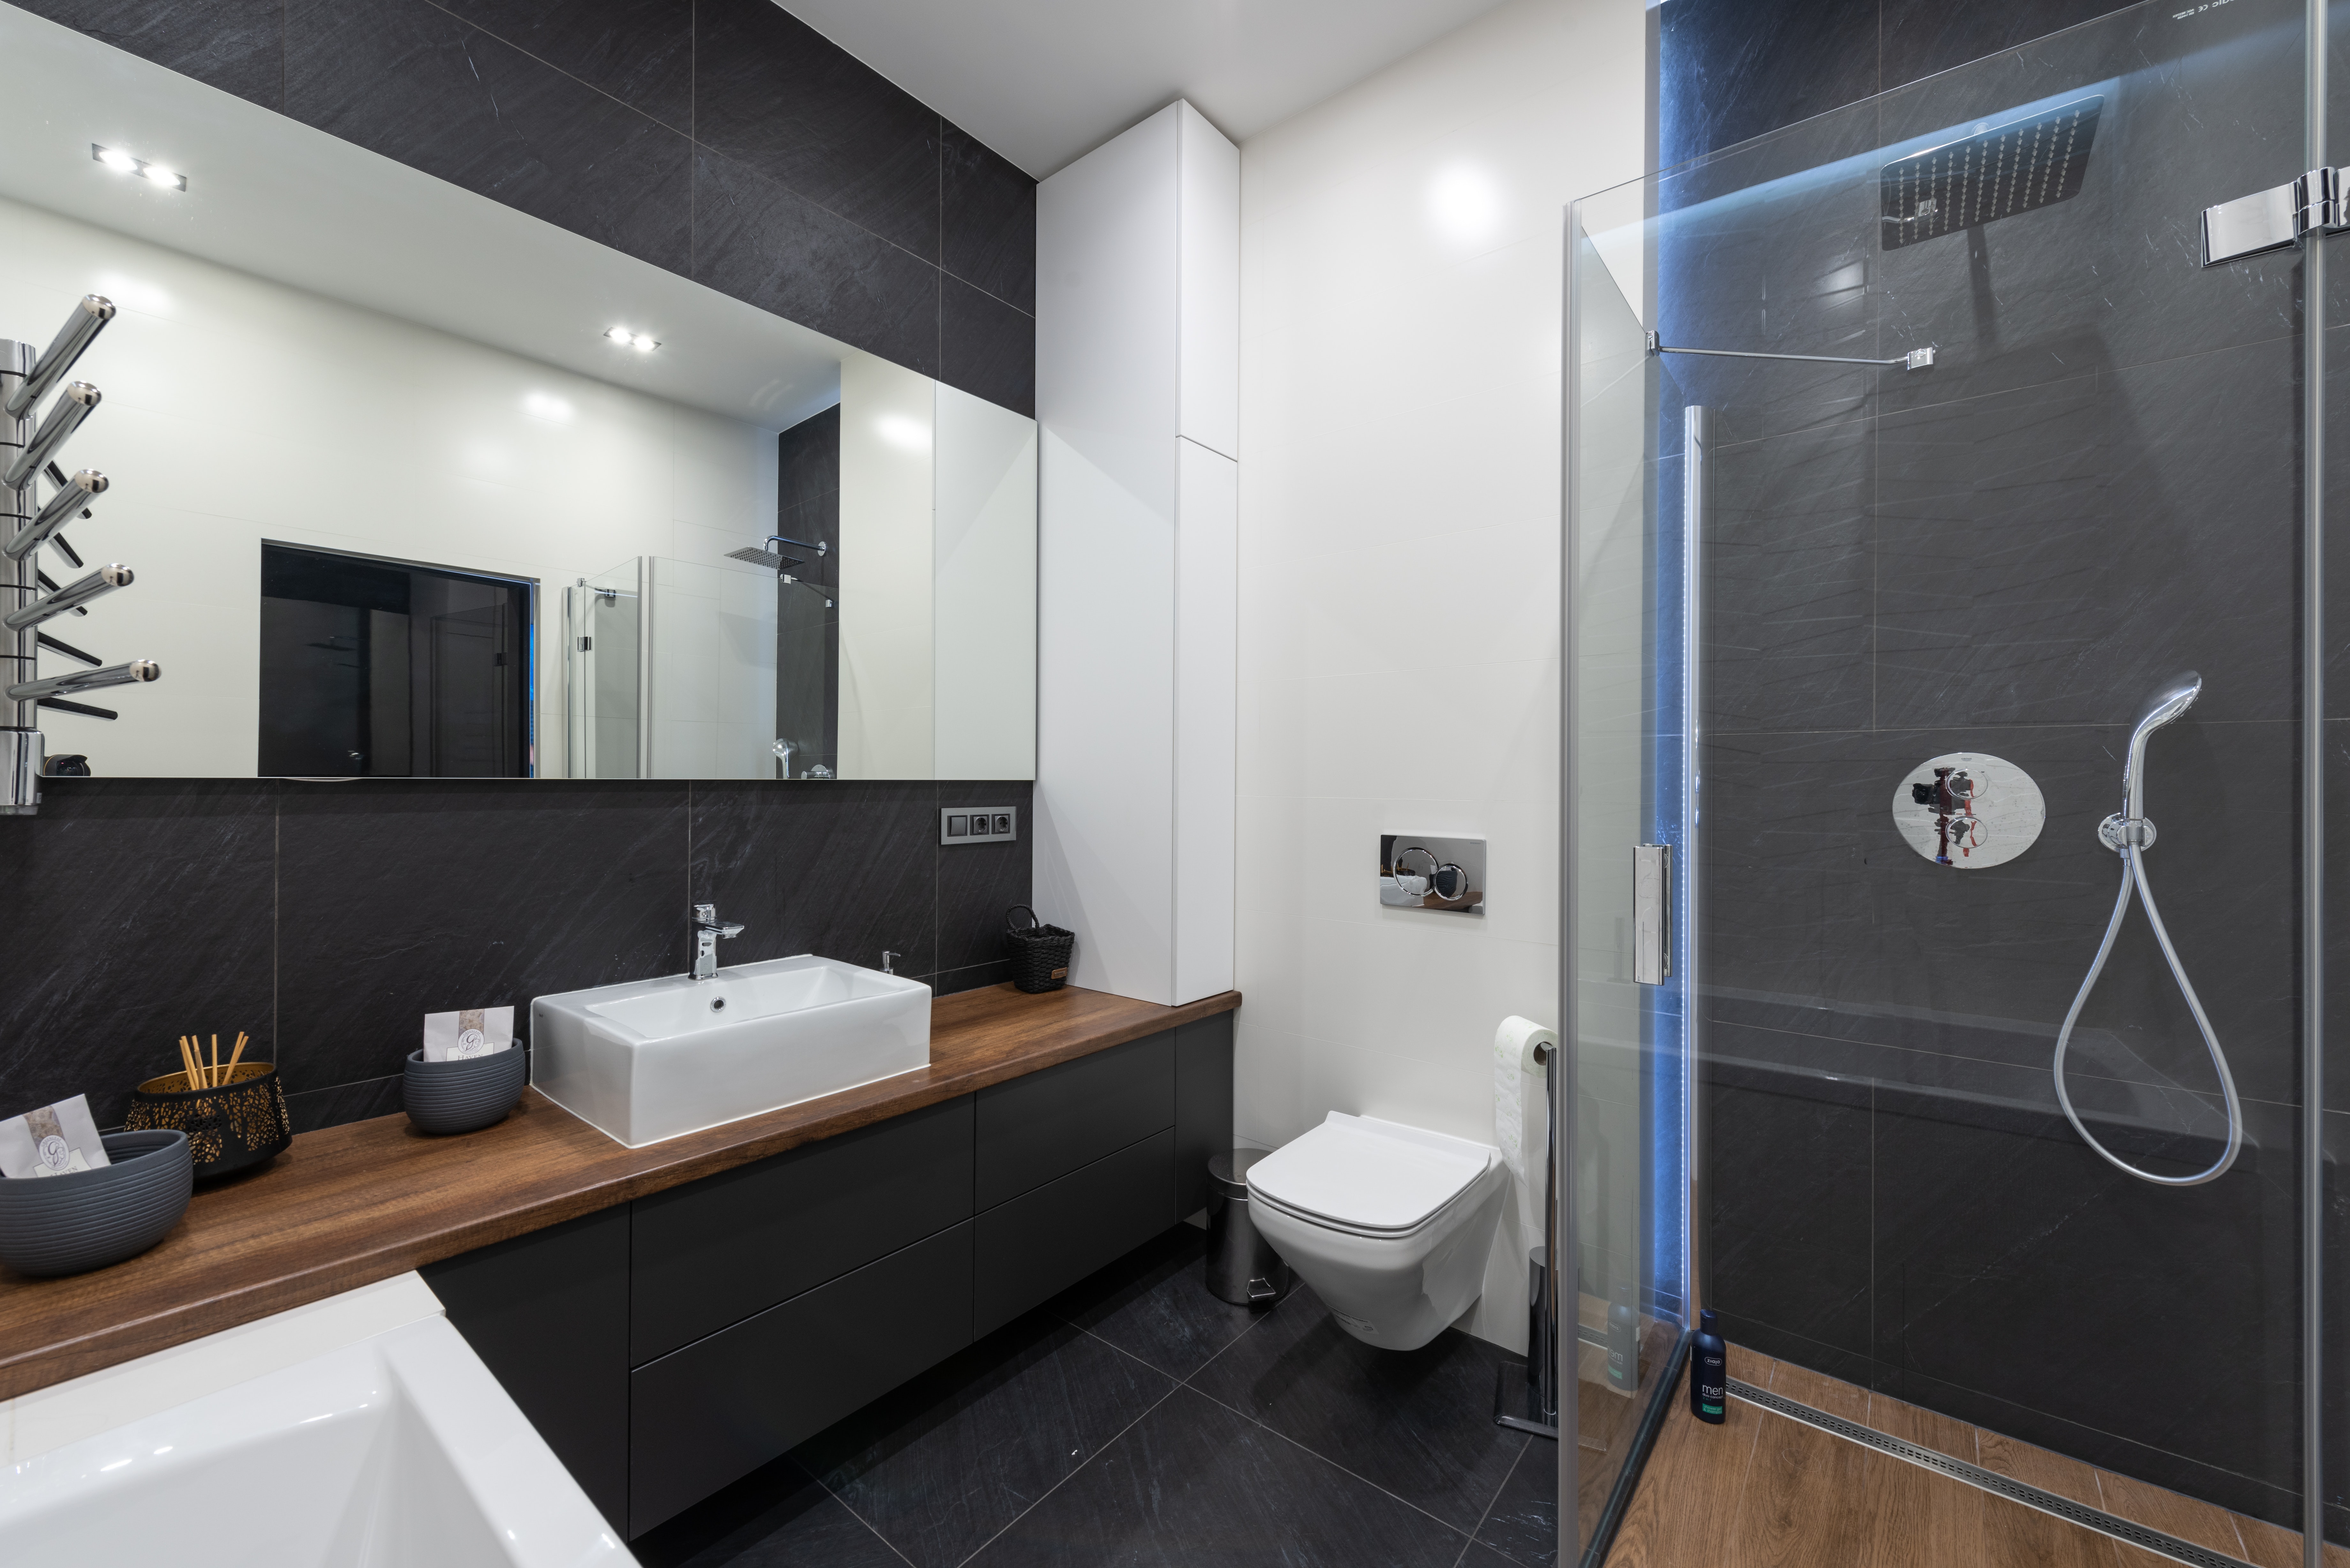 Tips For Creating A Luxury Bathroom In Your Home